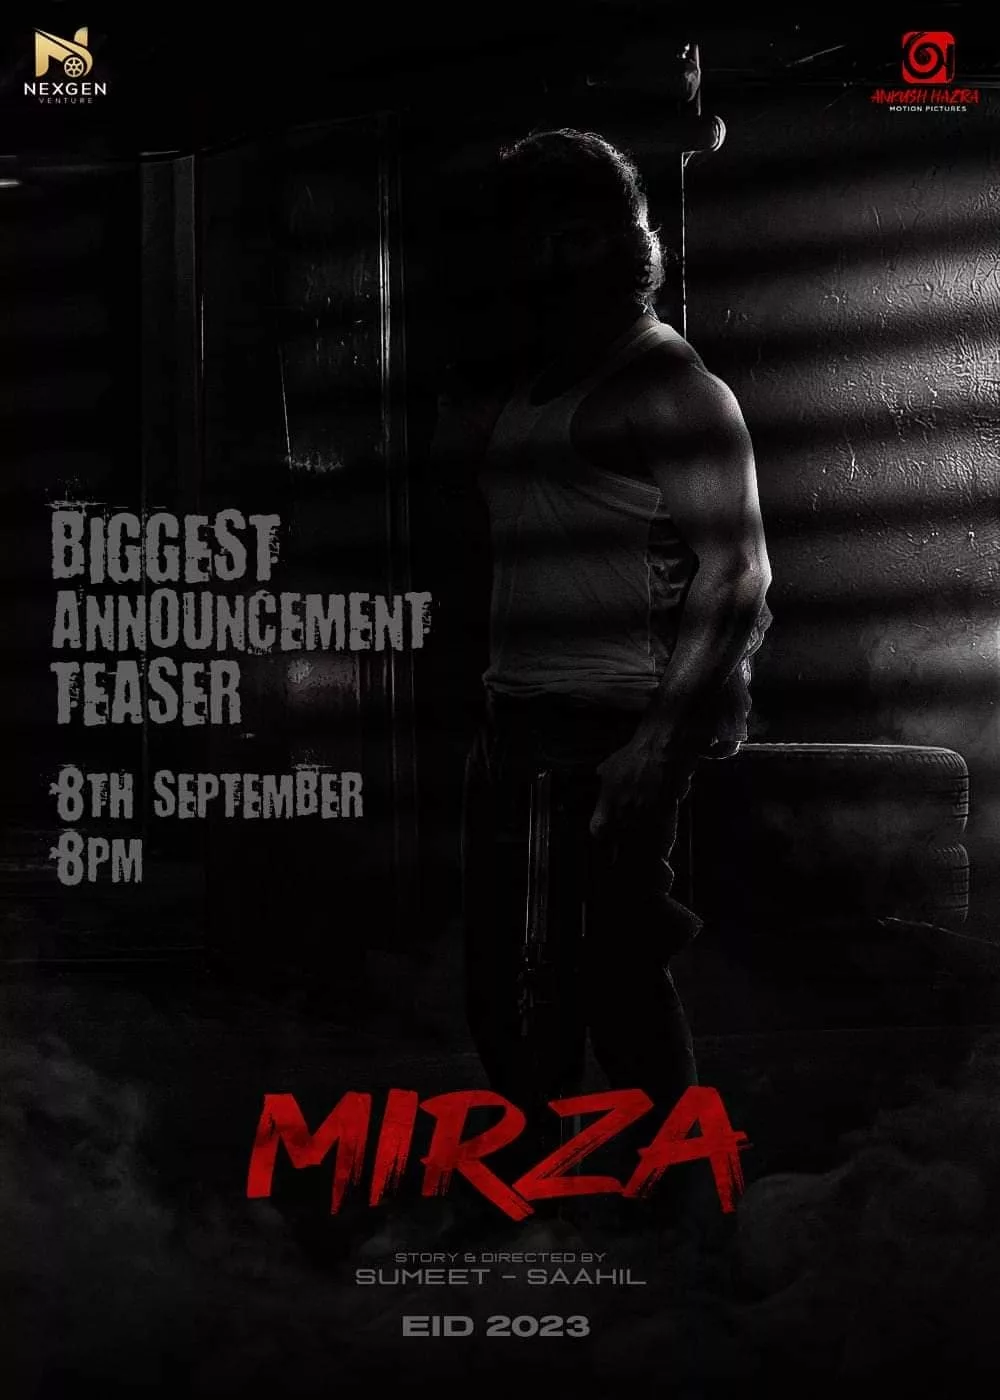 Poster for the movie "Mirza"